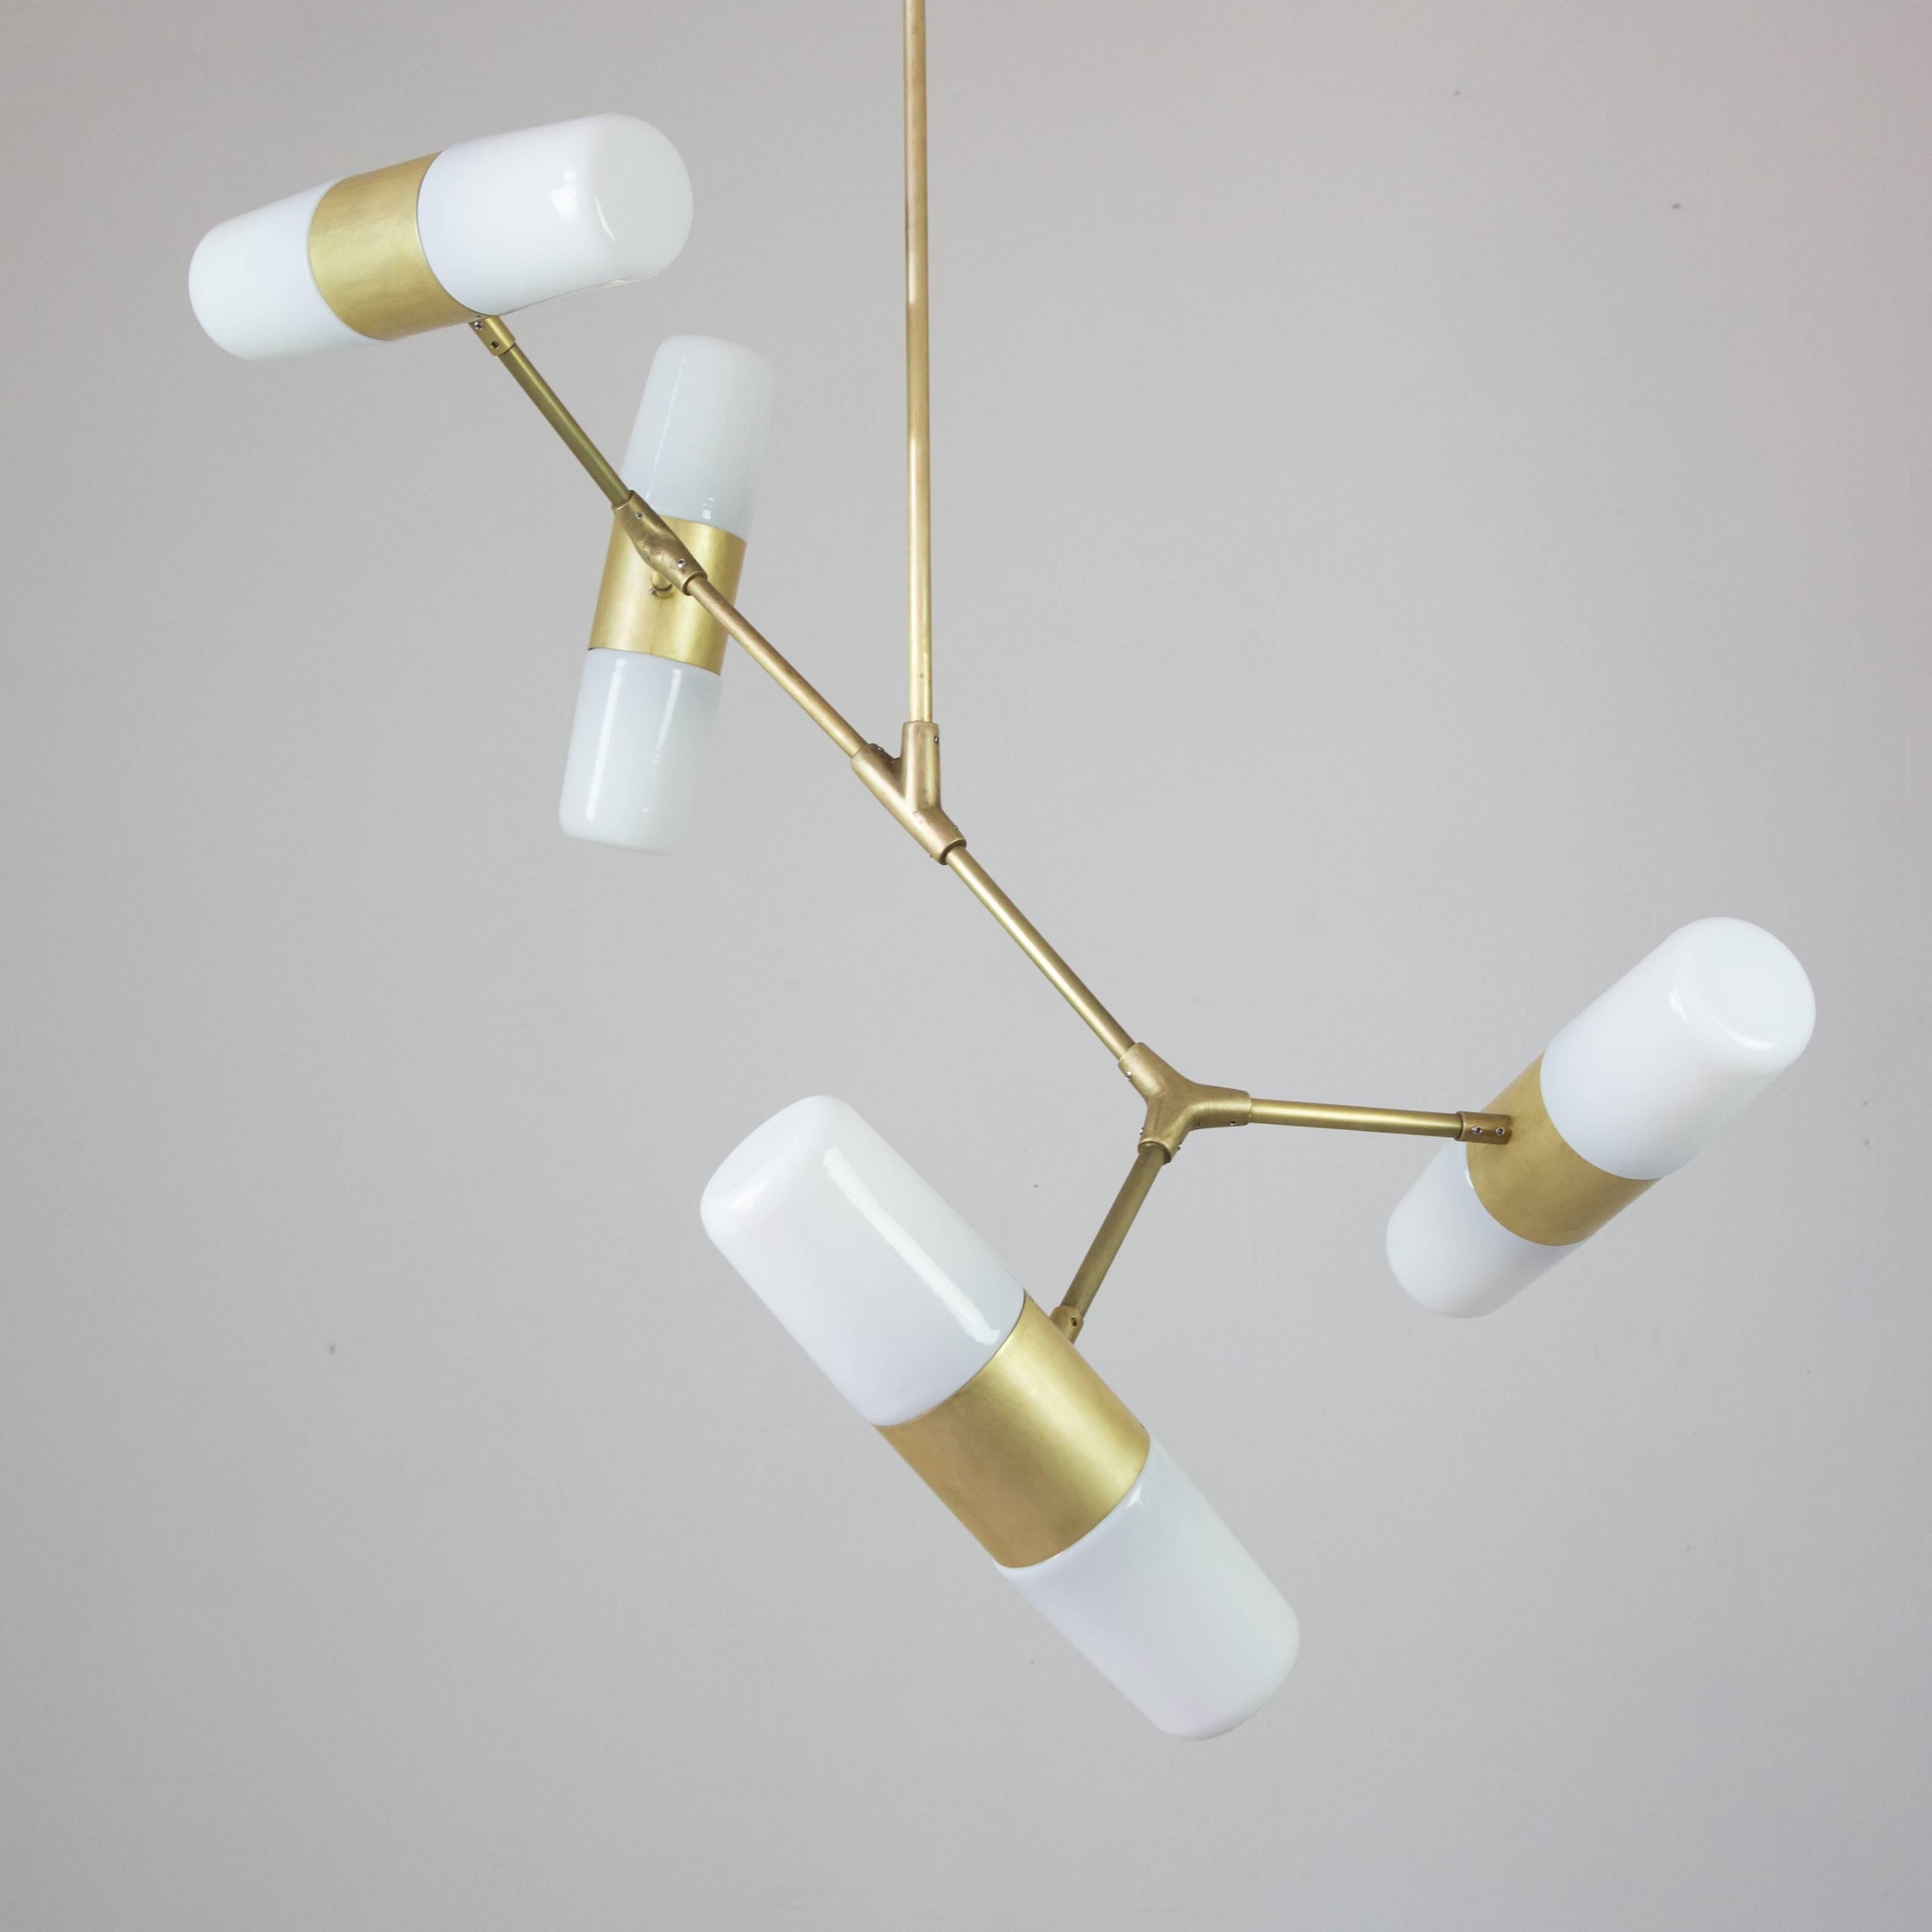 This pendant lamp is inspired by geometric patterns and angles, this lamp was created using traditional metalworking techniques such as cast bronze and handmade brass parts.

With handcrafted bronze connections, this pendant lamp has four double